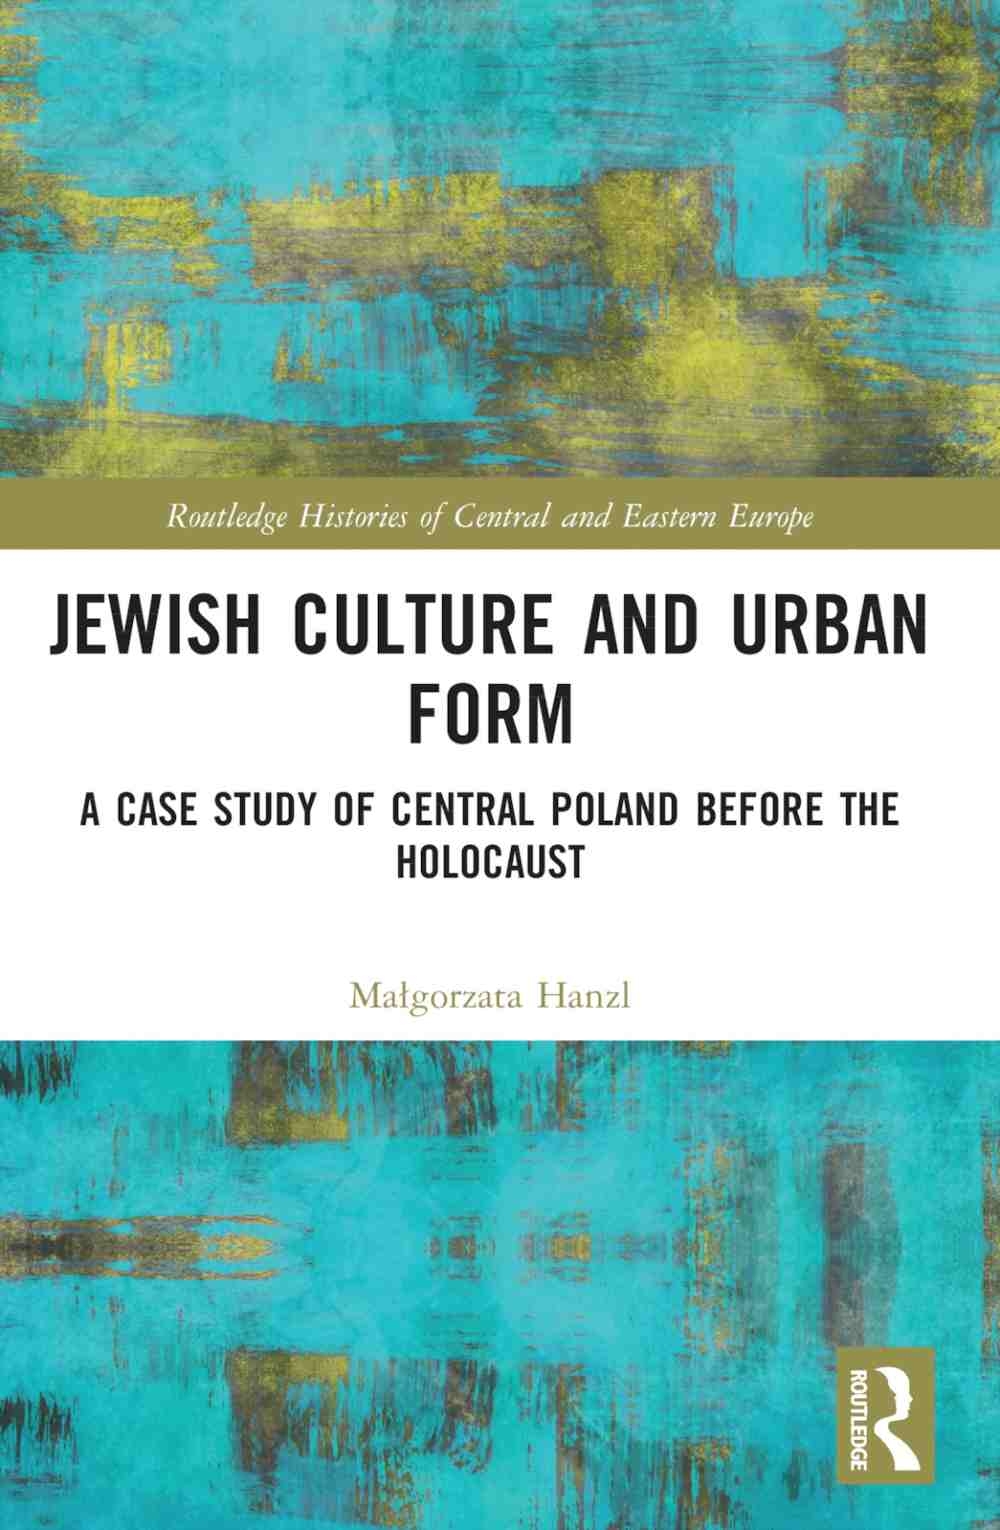 Jewish Culture and Urban Form: A Case Study of Central Poland Before the Holocaust